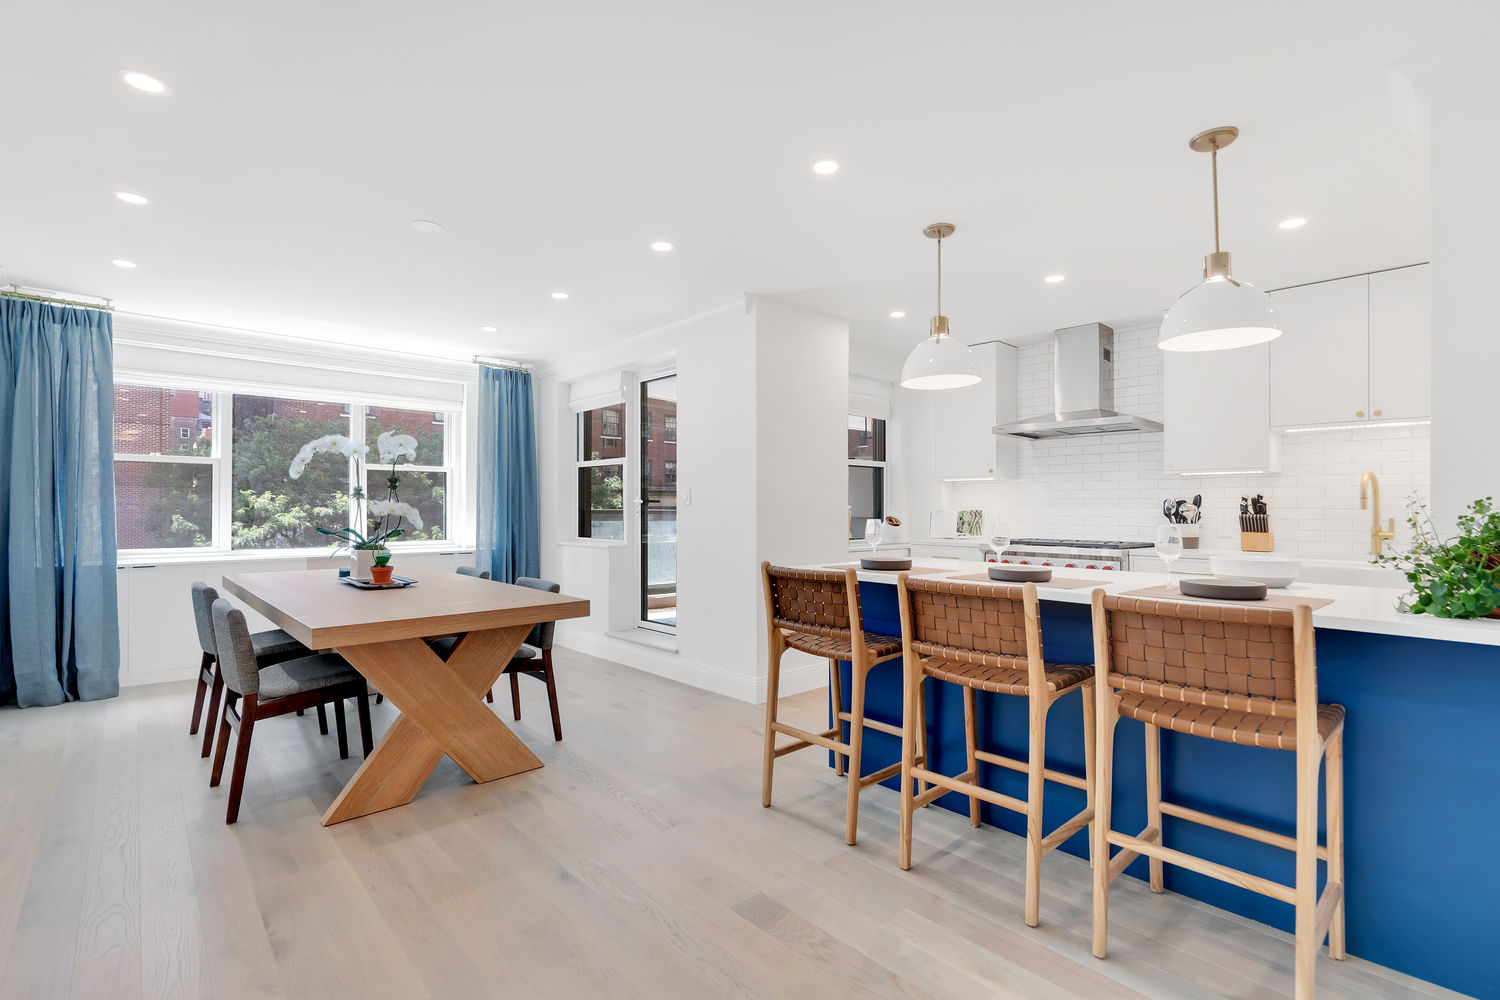 Remodeled kitchen with blue island, white counters, recessed lighting, and large dining area.